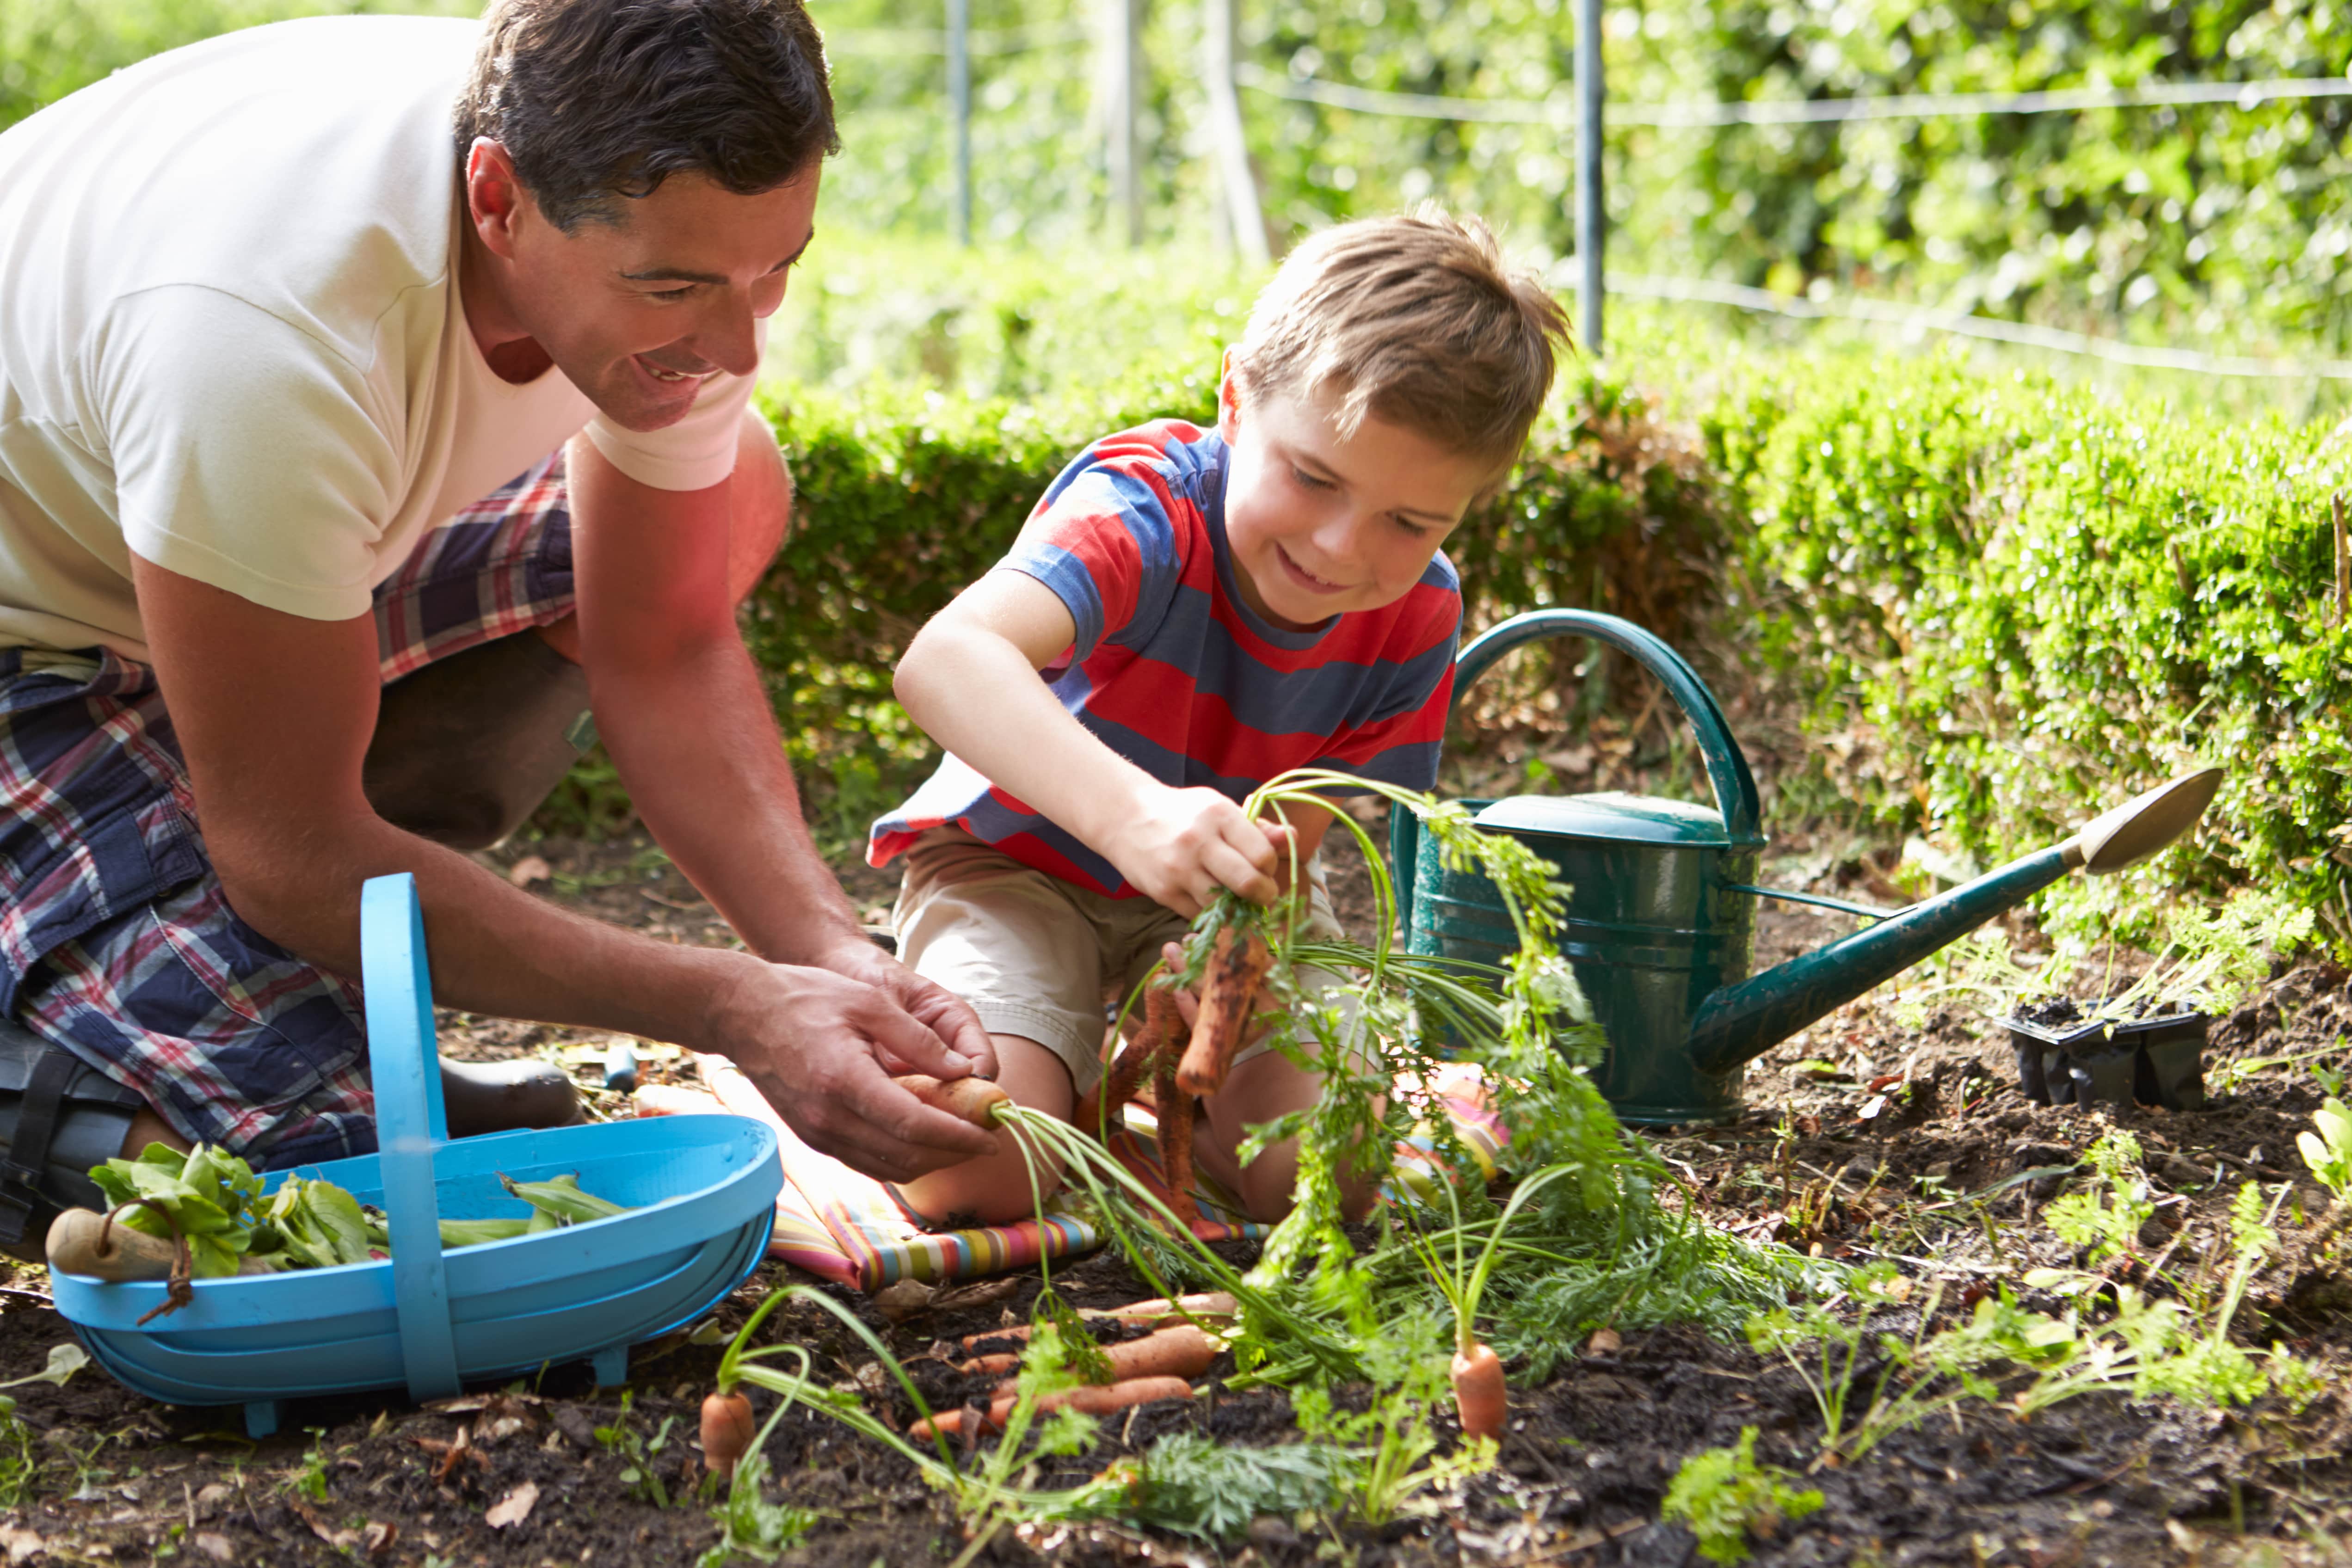 6 Tips for Planning the Perfect Home Garden This Season